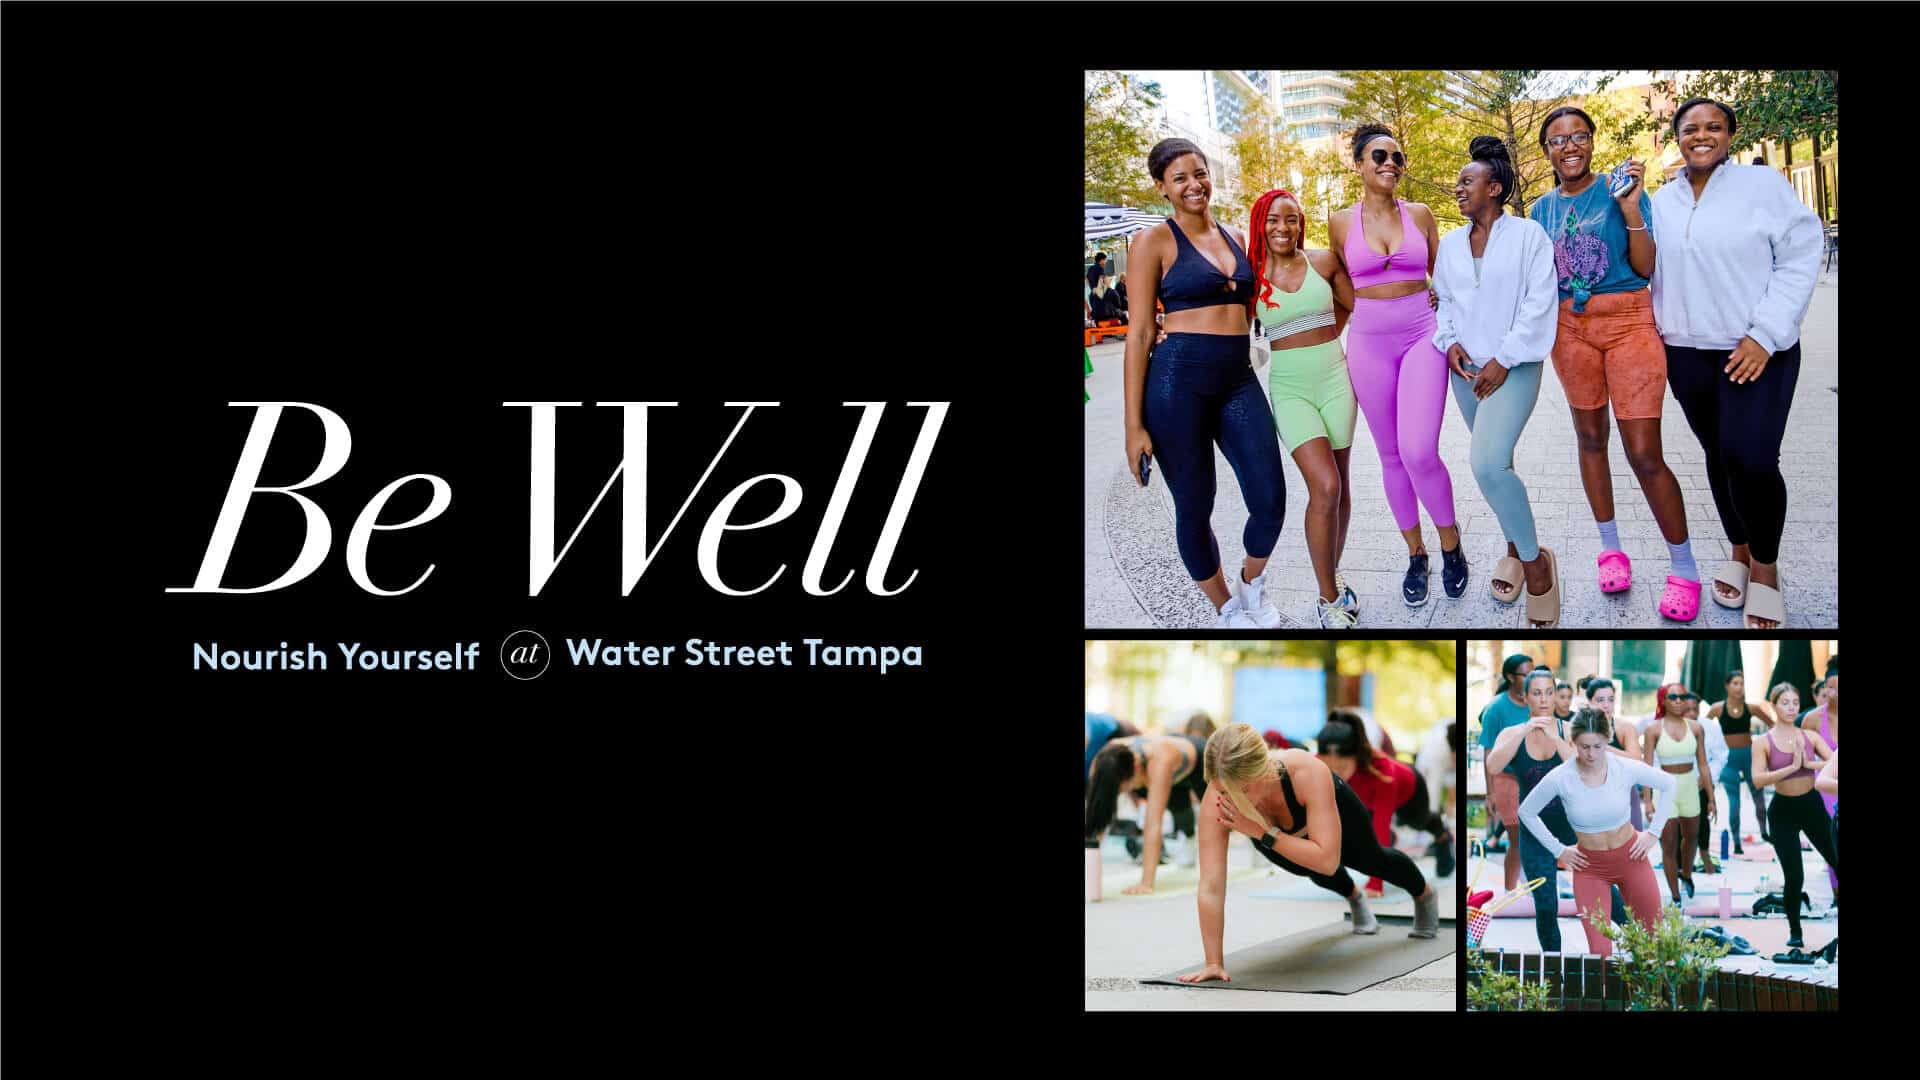 Be Well Outdoor Pilates